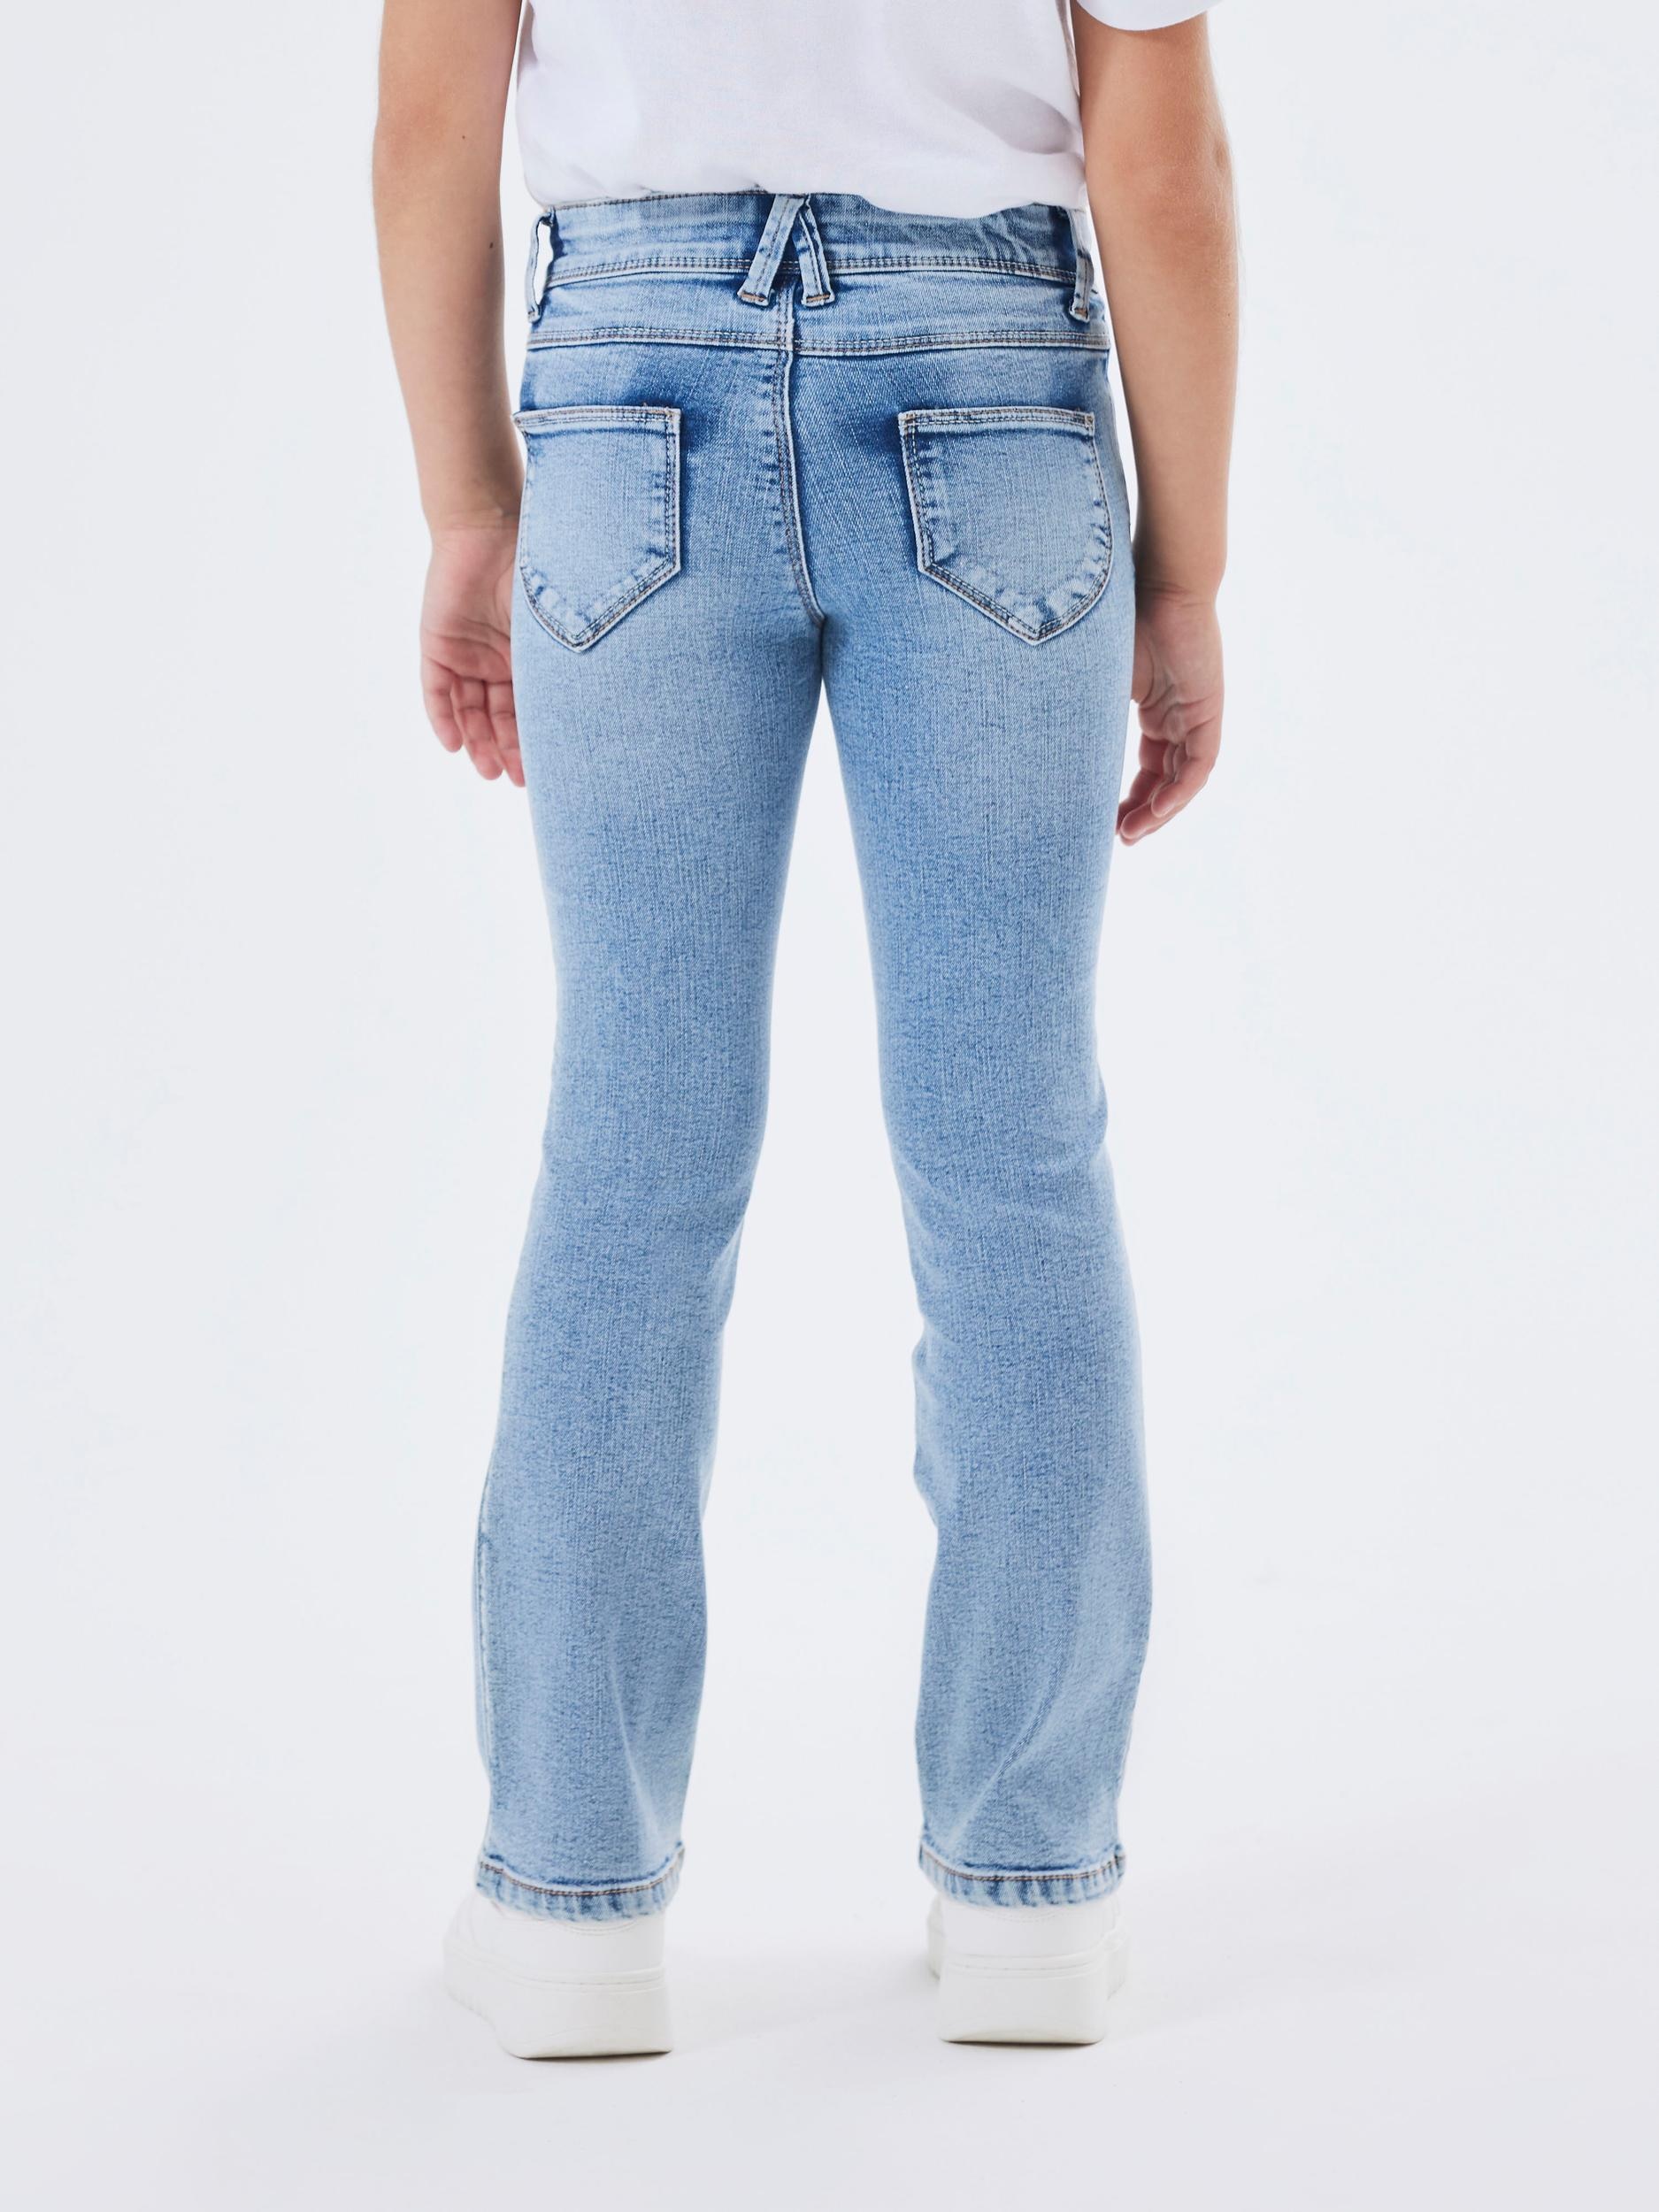 Stretch NOOS«, BOOT 1142-AU Name JEANS mit SKINNY Bootcut-Jeans bestellen »NKFPOLLY It